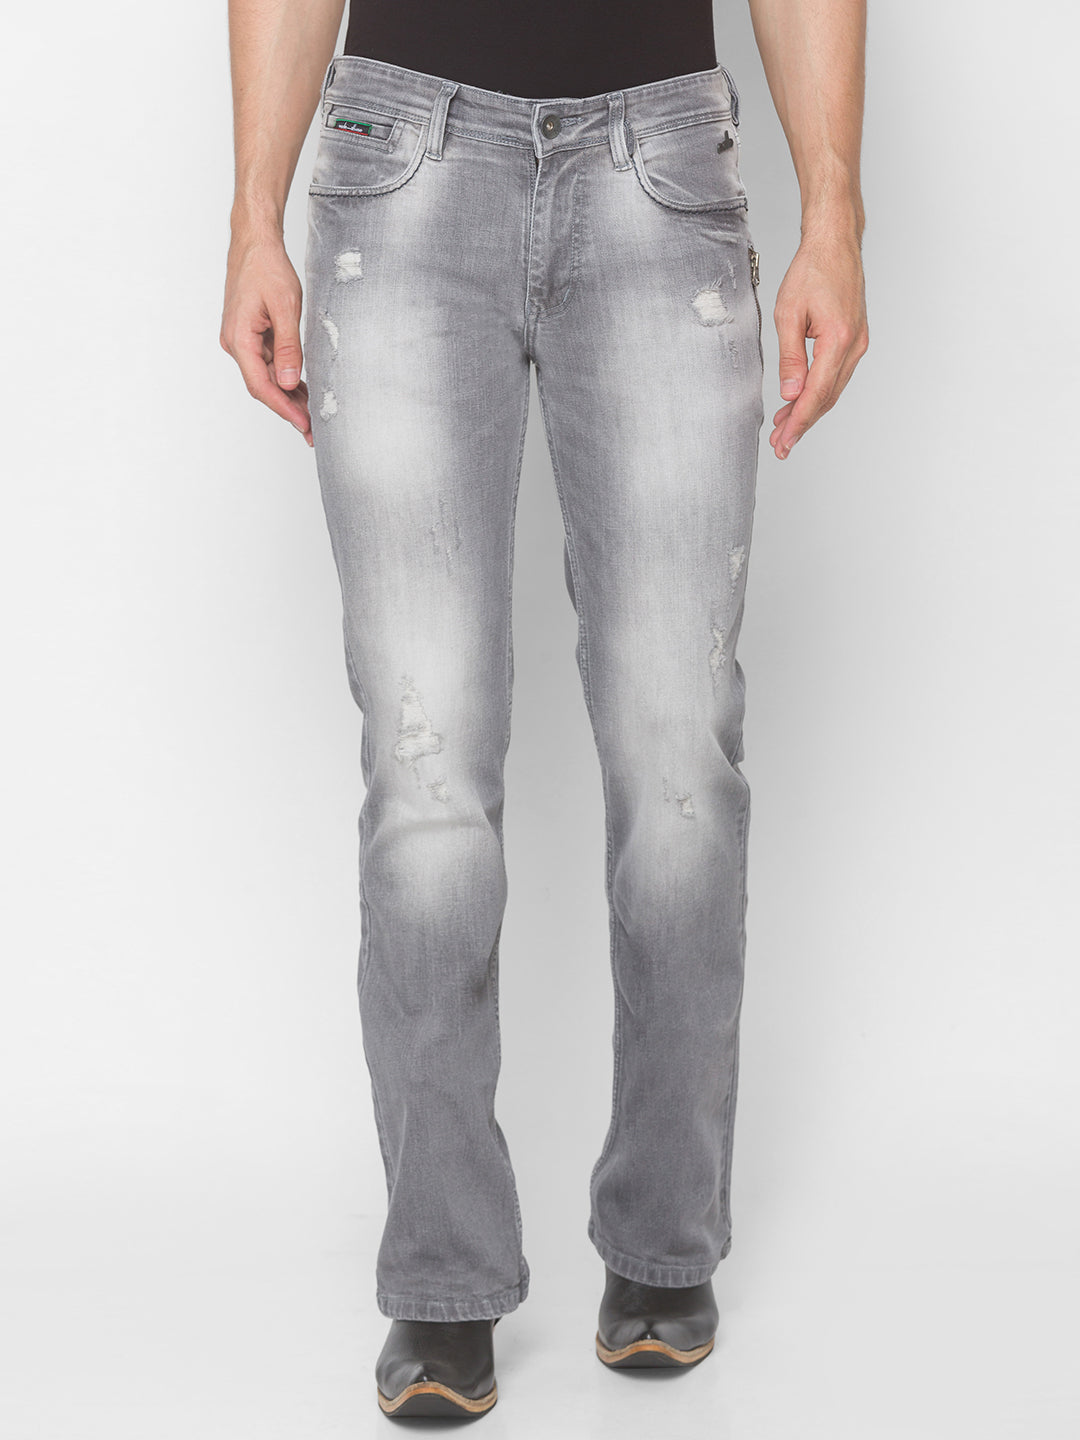 Carman Tapered Jeans For Tall Men Grey | American Tall